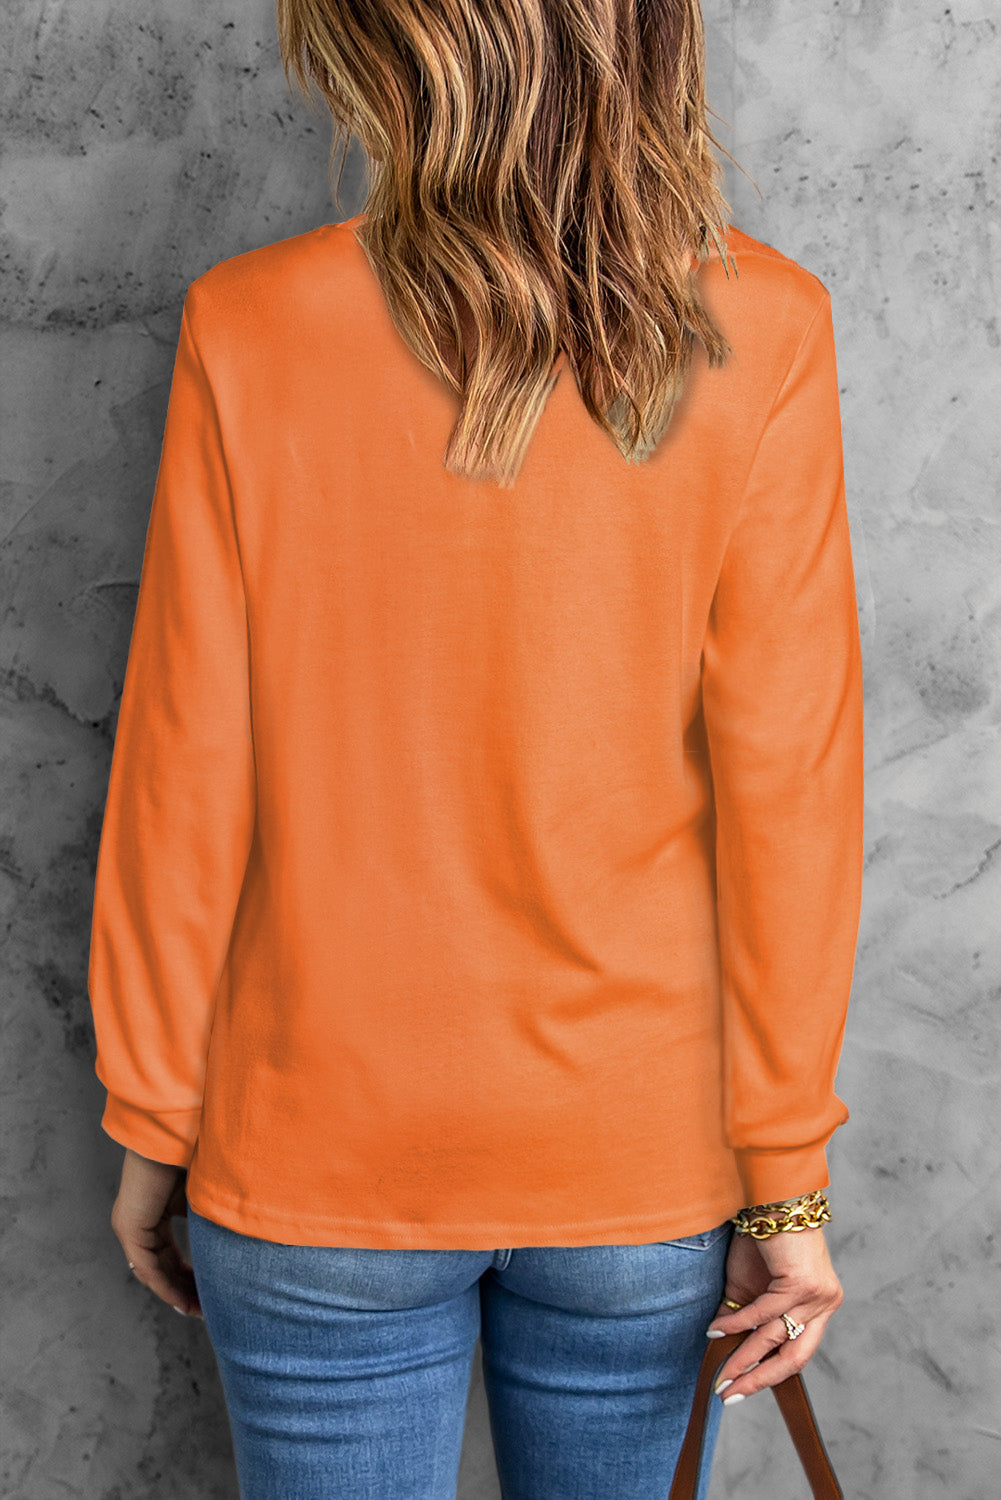 be the SUNSHINE Graphic Print Long Sleeve Top